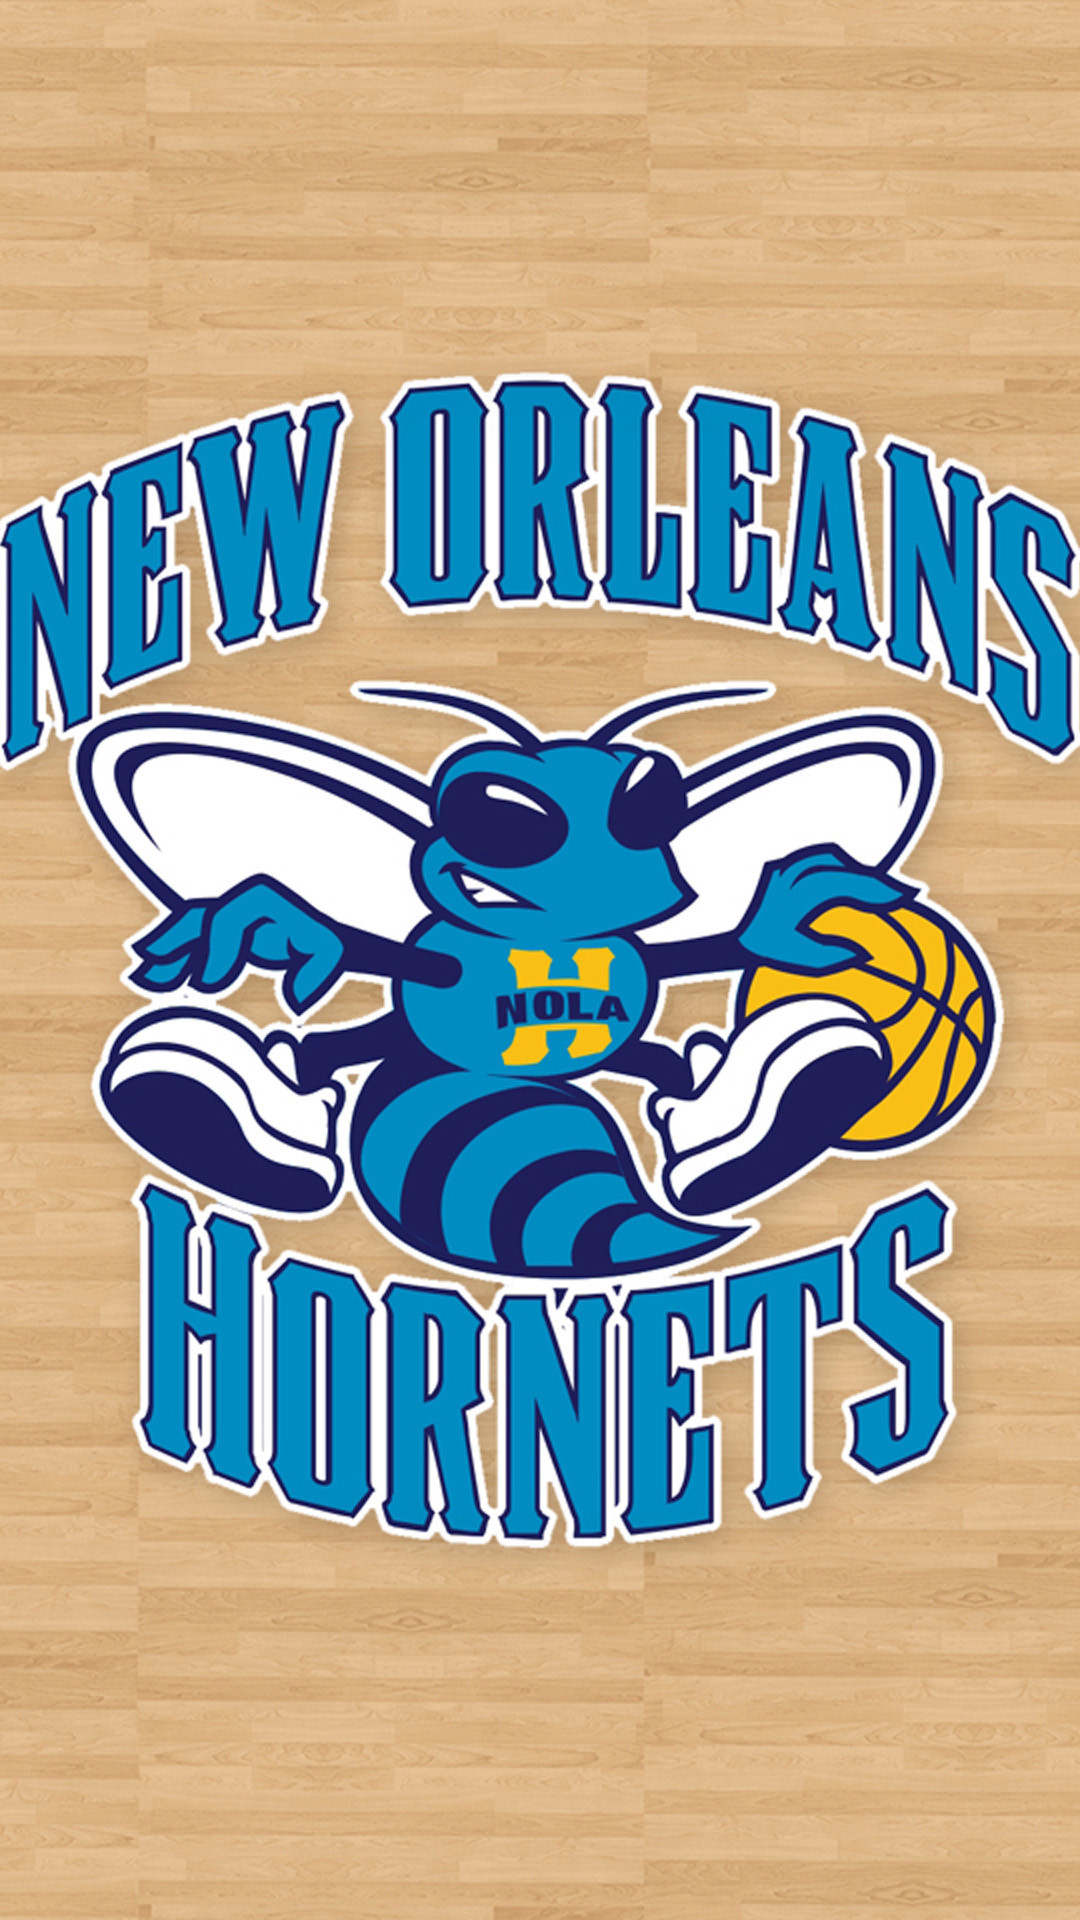 1080x1920 Hornets Wallpapers for Galaxy S5.jpg